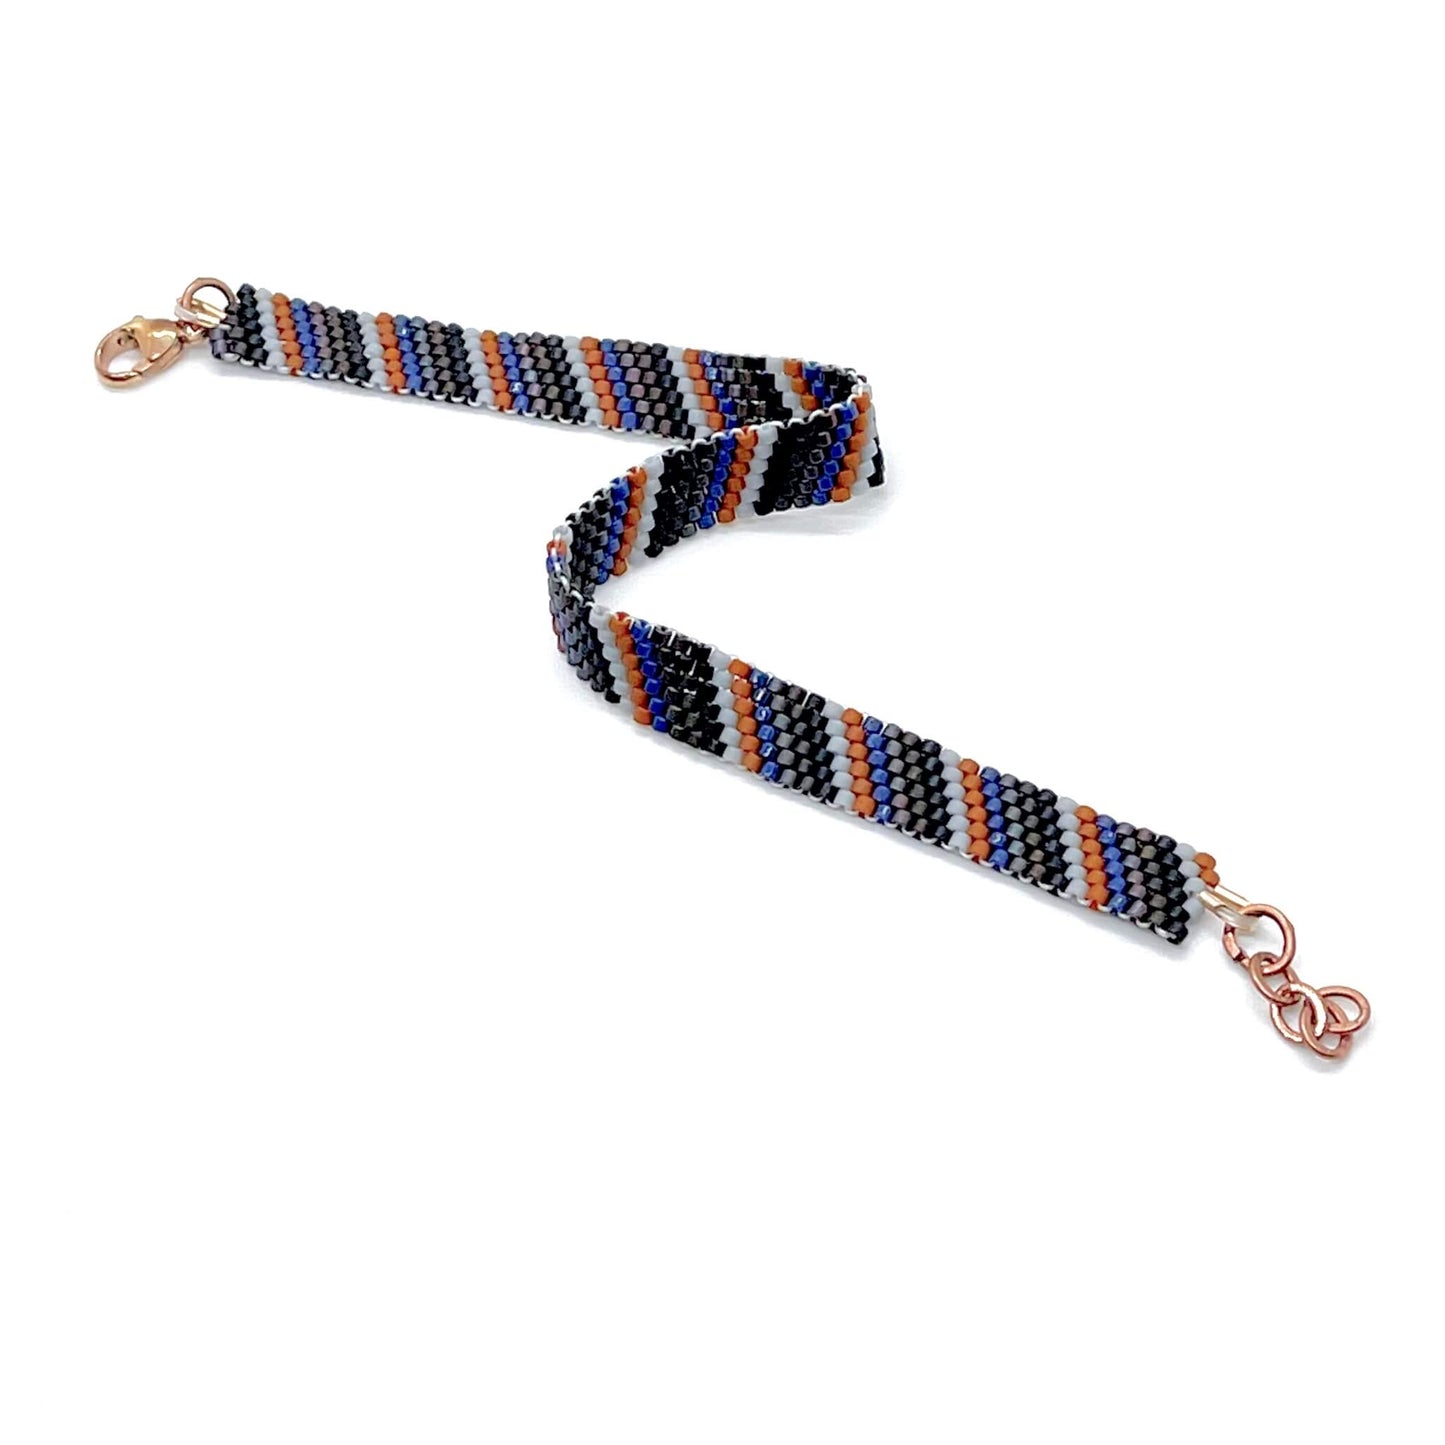 Men’s hand woven beaded peyote bracelet with clasp and stripes in black, brown, bronze, blue, rust, and gray seed beads.